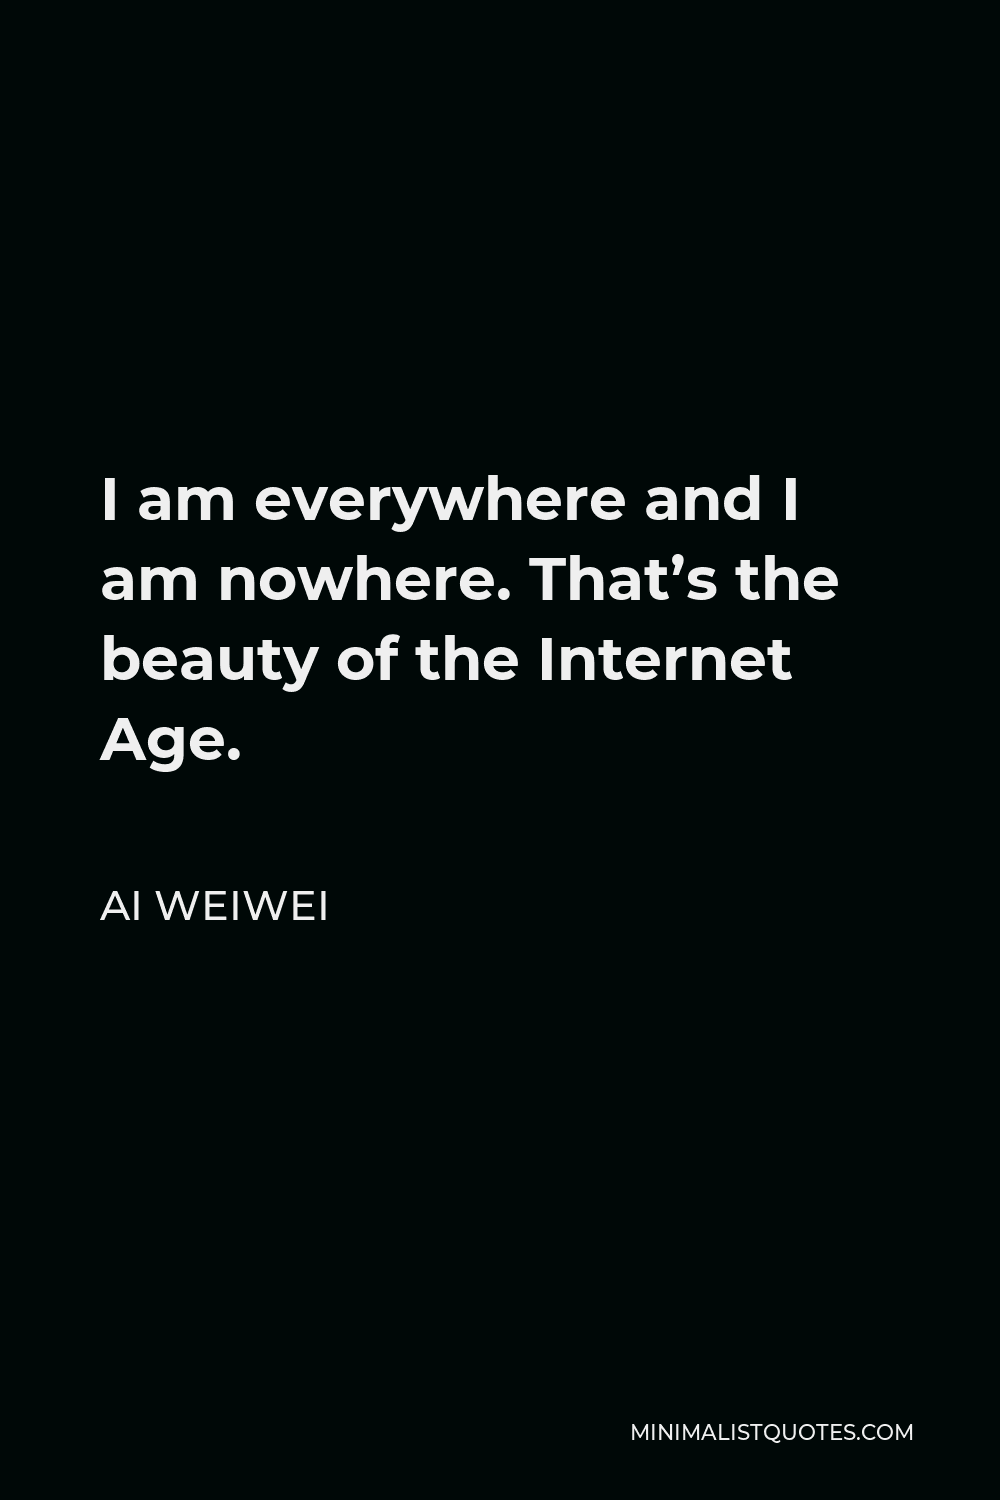 Ai Weiwei Quote - I am everywhere and I am nowhere. That’s the beauty of the Internet Age.